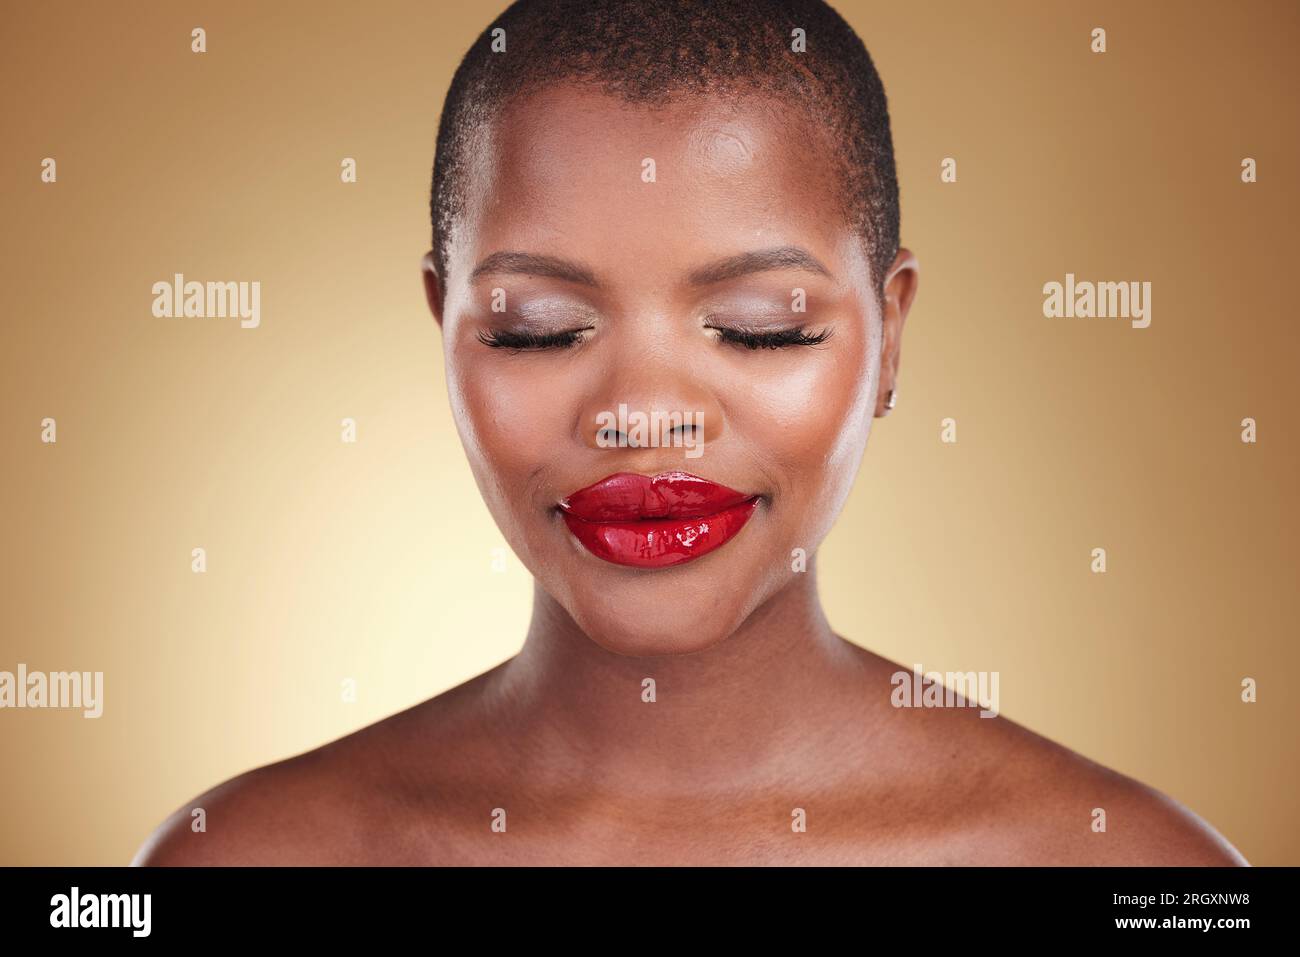 Red lipstick, makeup and a black woman with beauty in studio or skin care,  glow and cosmetics. Face of an African person or model with facial shine  Stock Photo - Alamy